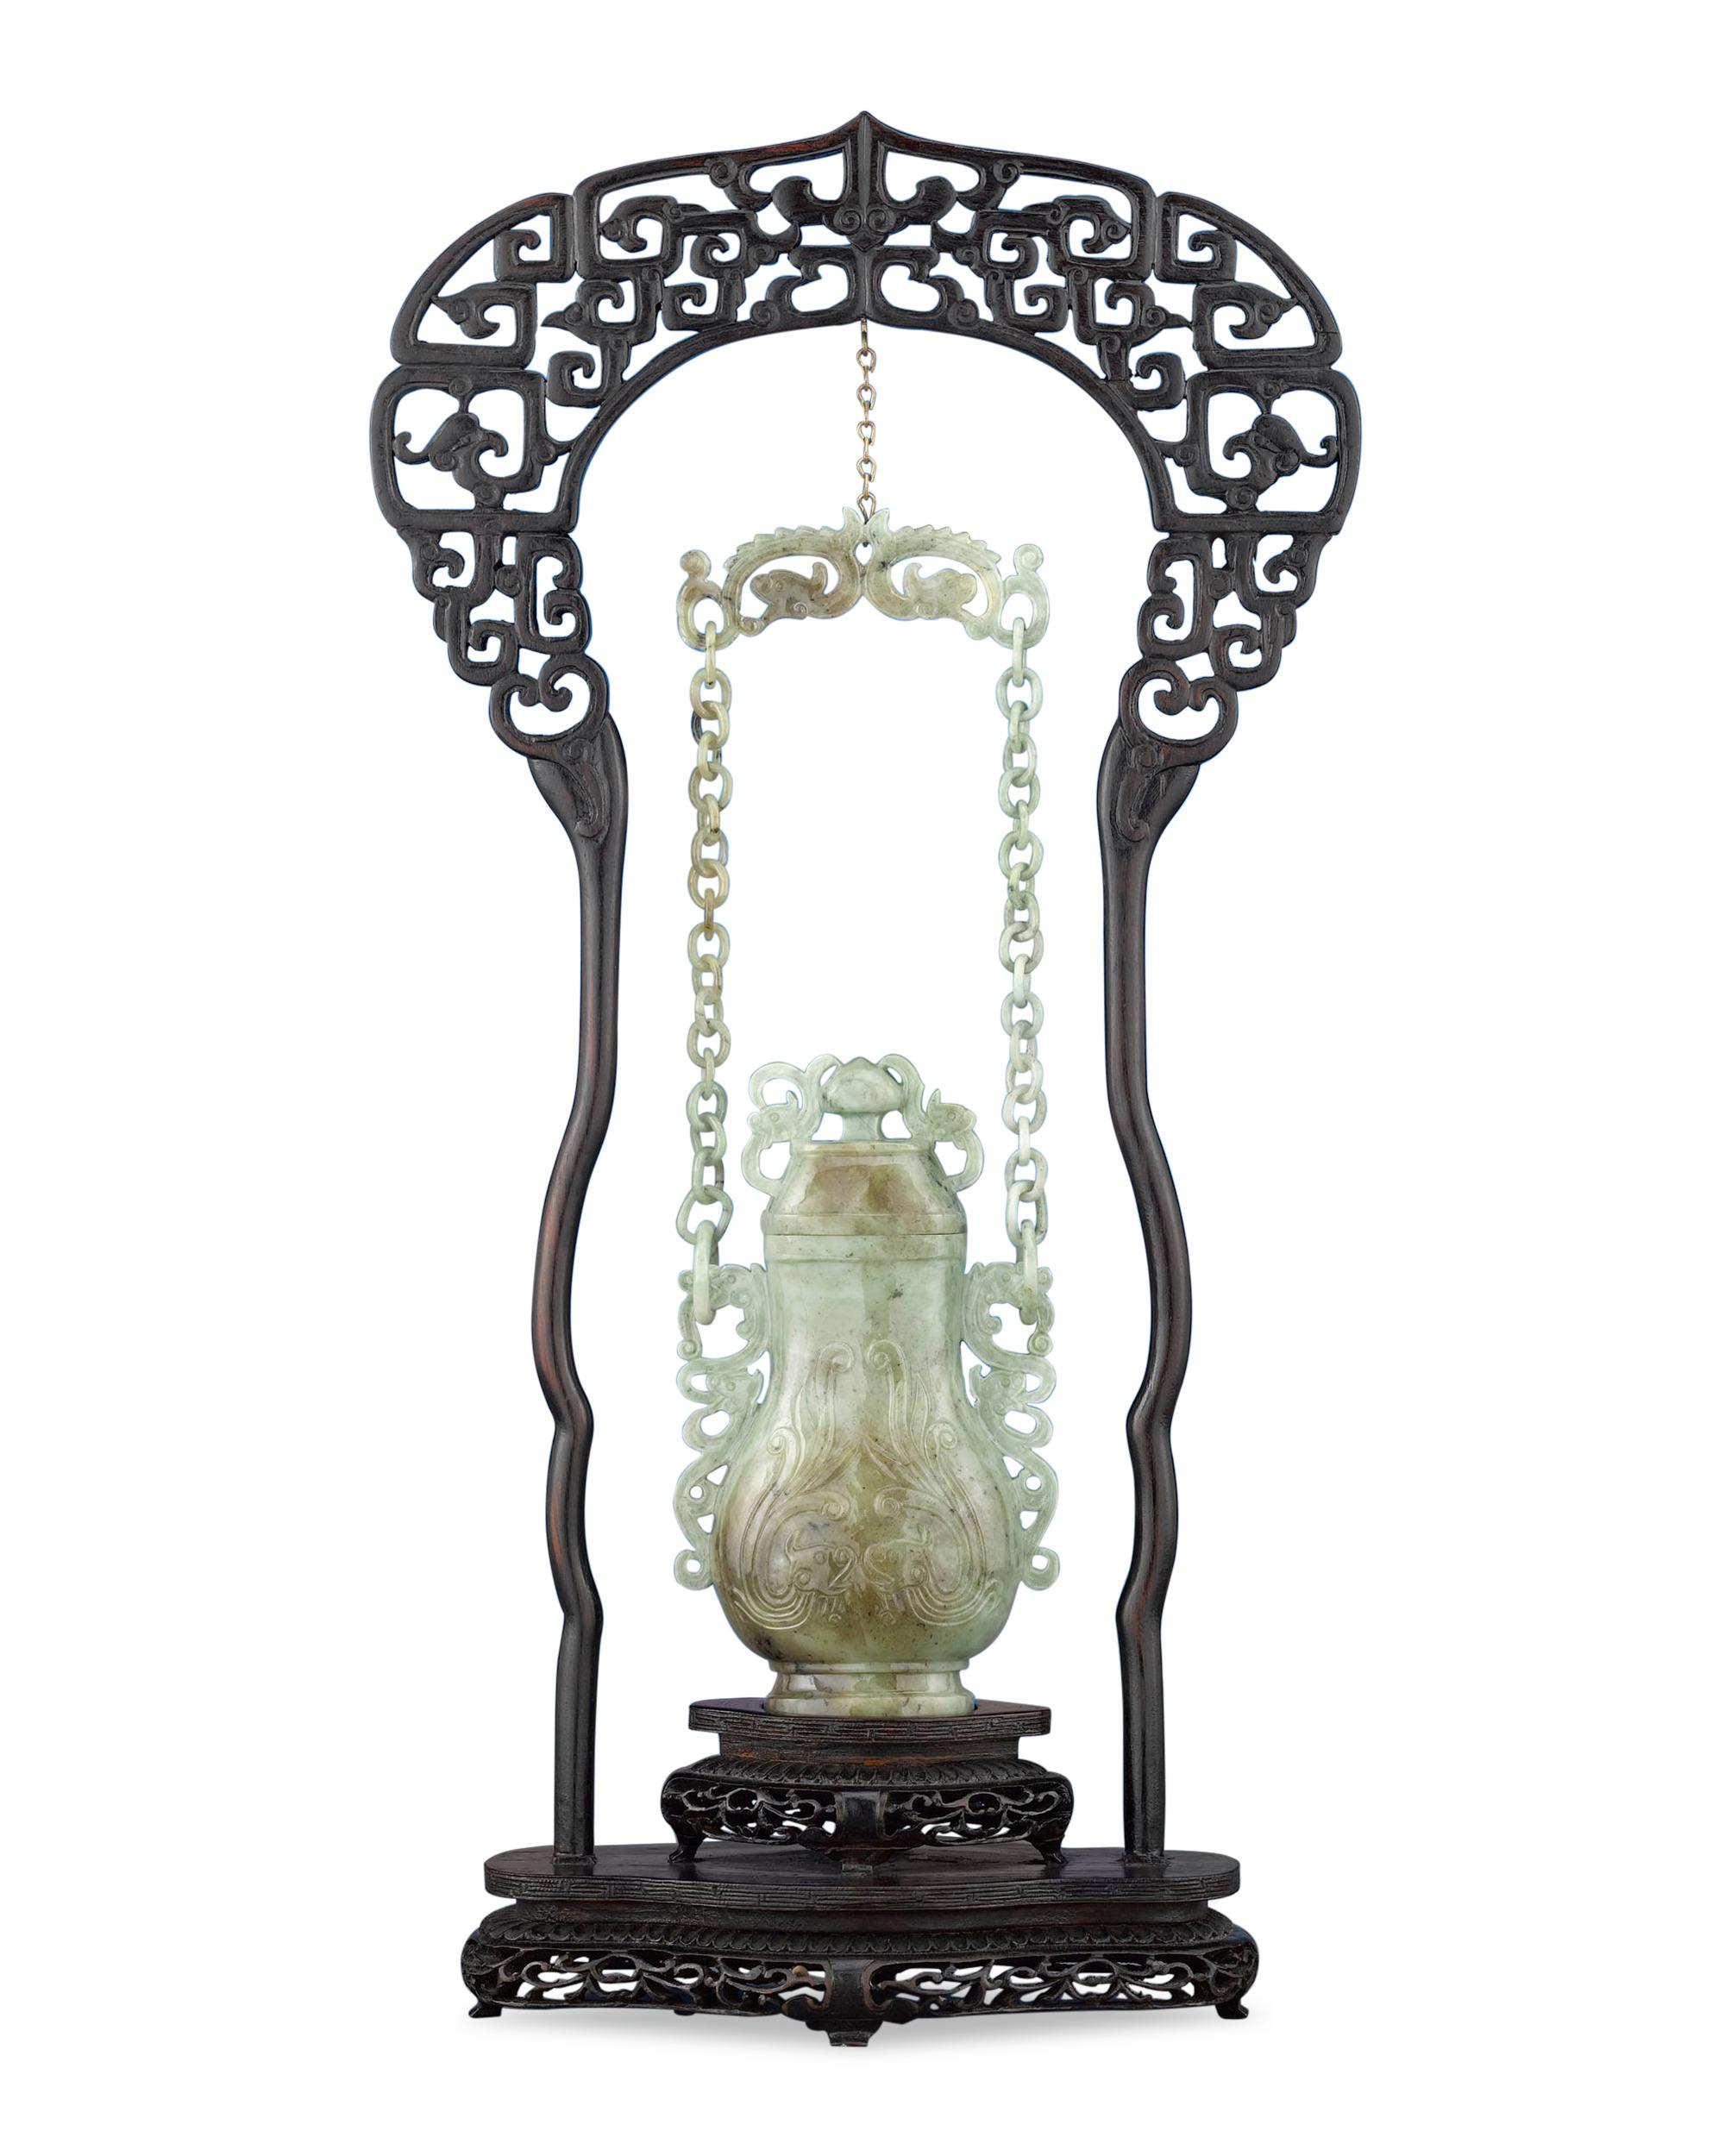 This rare Chinese hanging vase, carved of fine moss-in-snow jade, boasts a host of dragons, the most potent symbols of good fortune in China. Its intricate stand incorporates equally lucky, billowing clouds into its canopy. Hanging vases such as